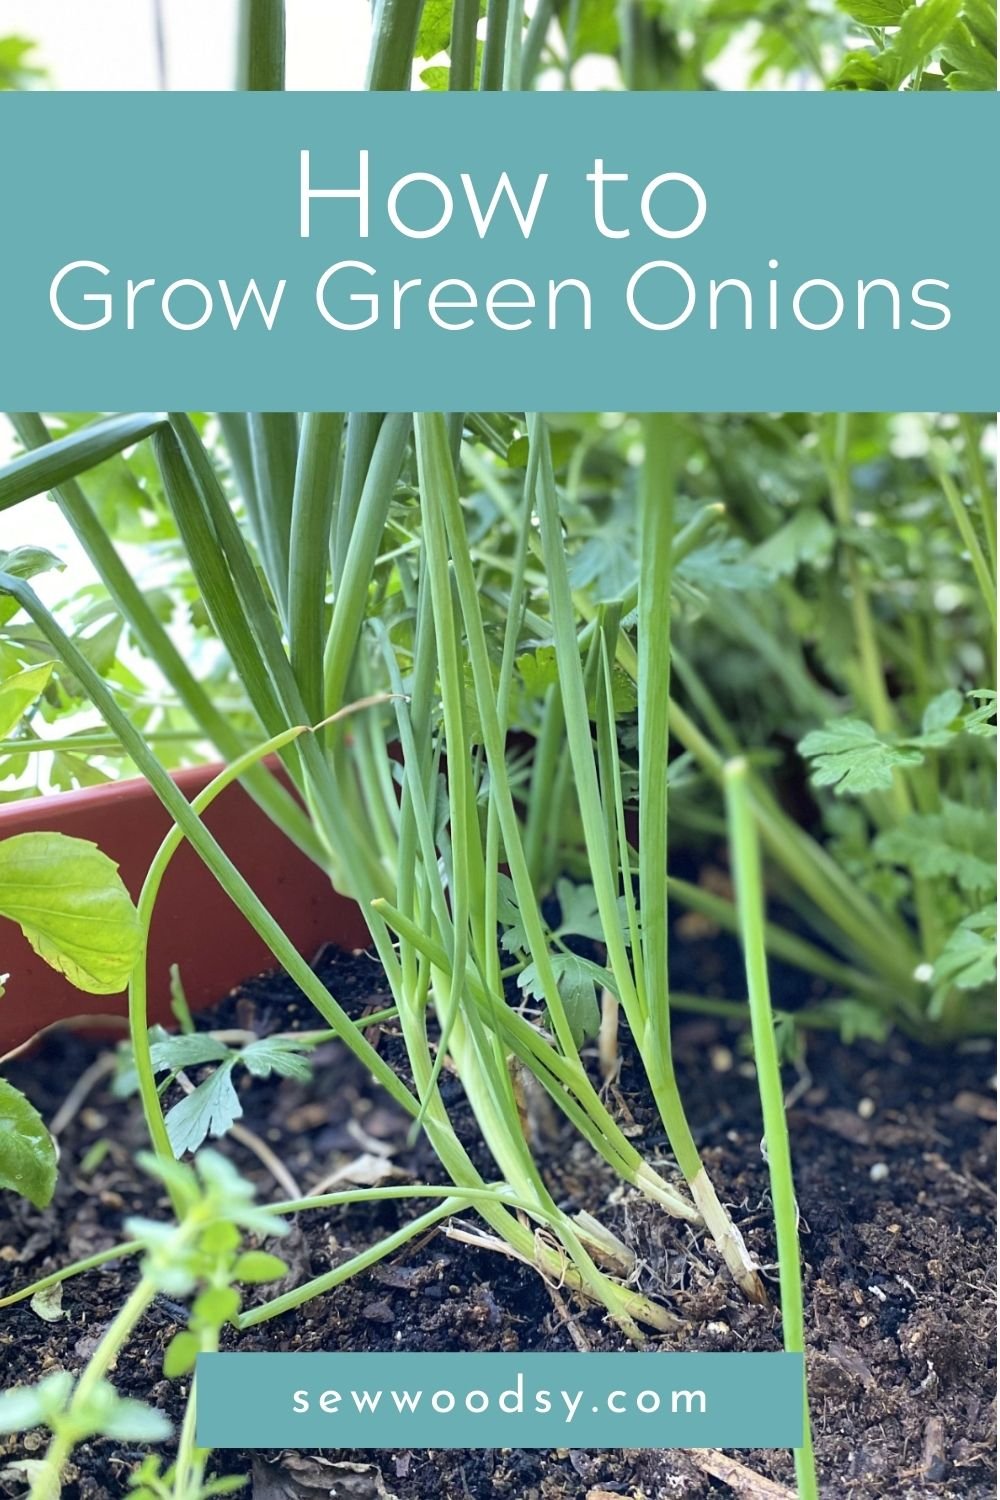 A bundle of green onions growing in dirt in a garden with text on image for Pinterest.